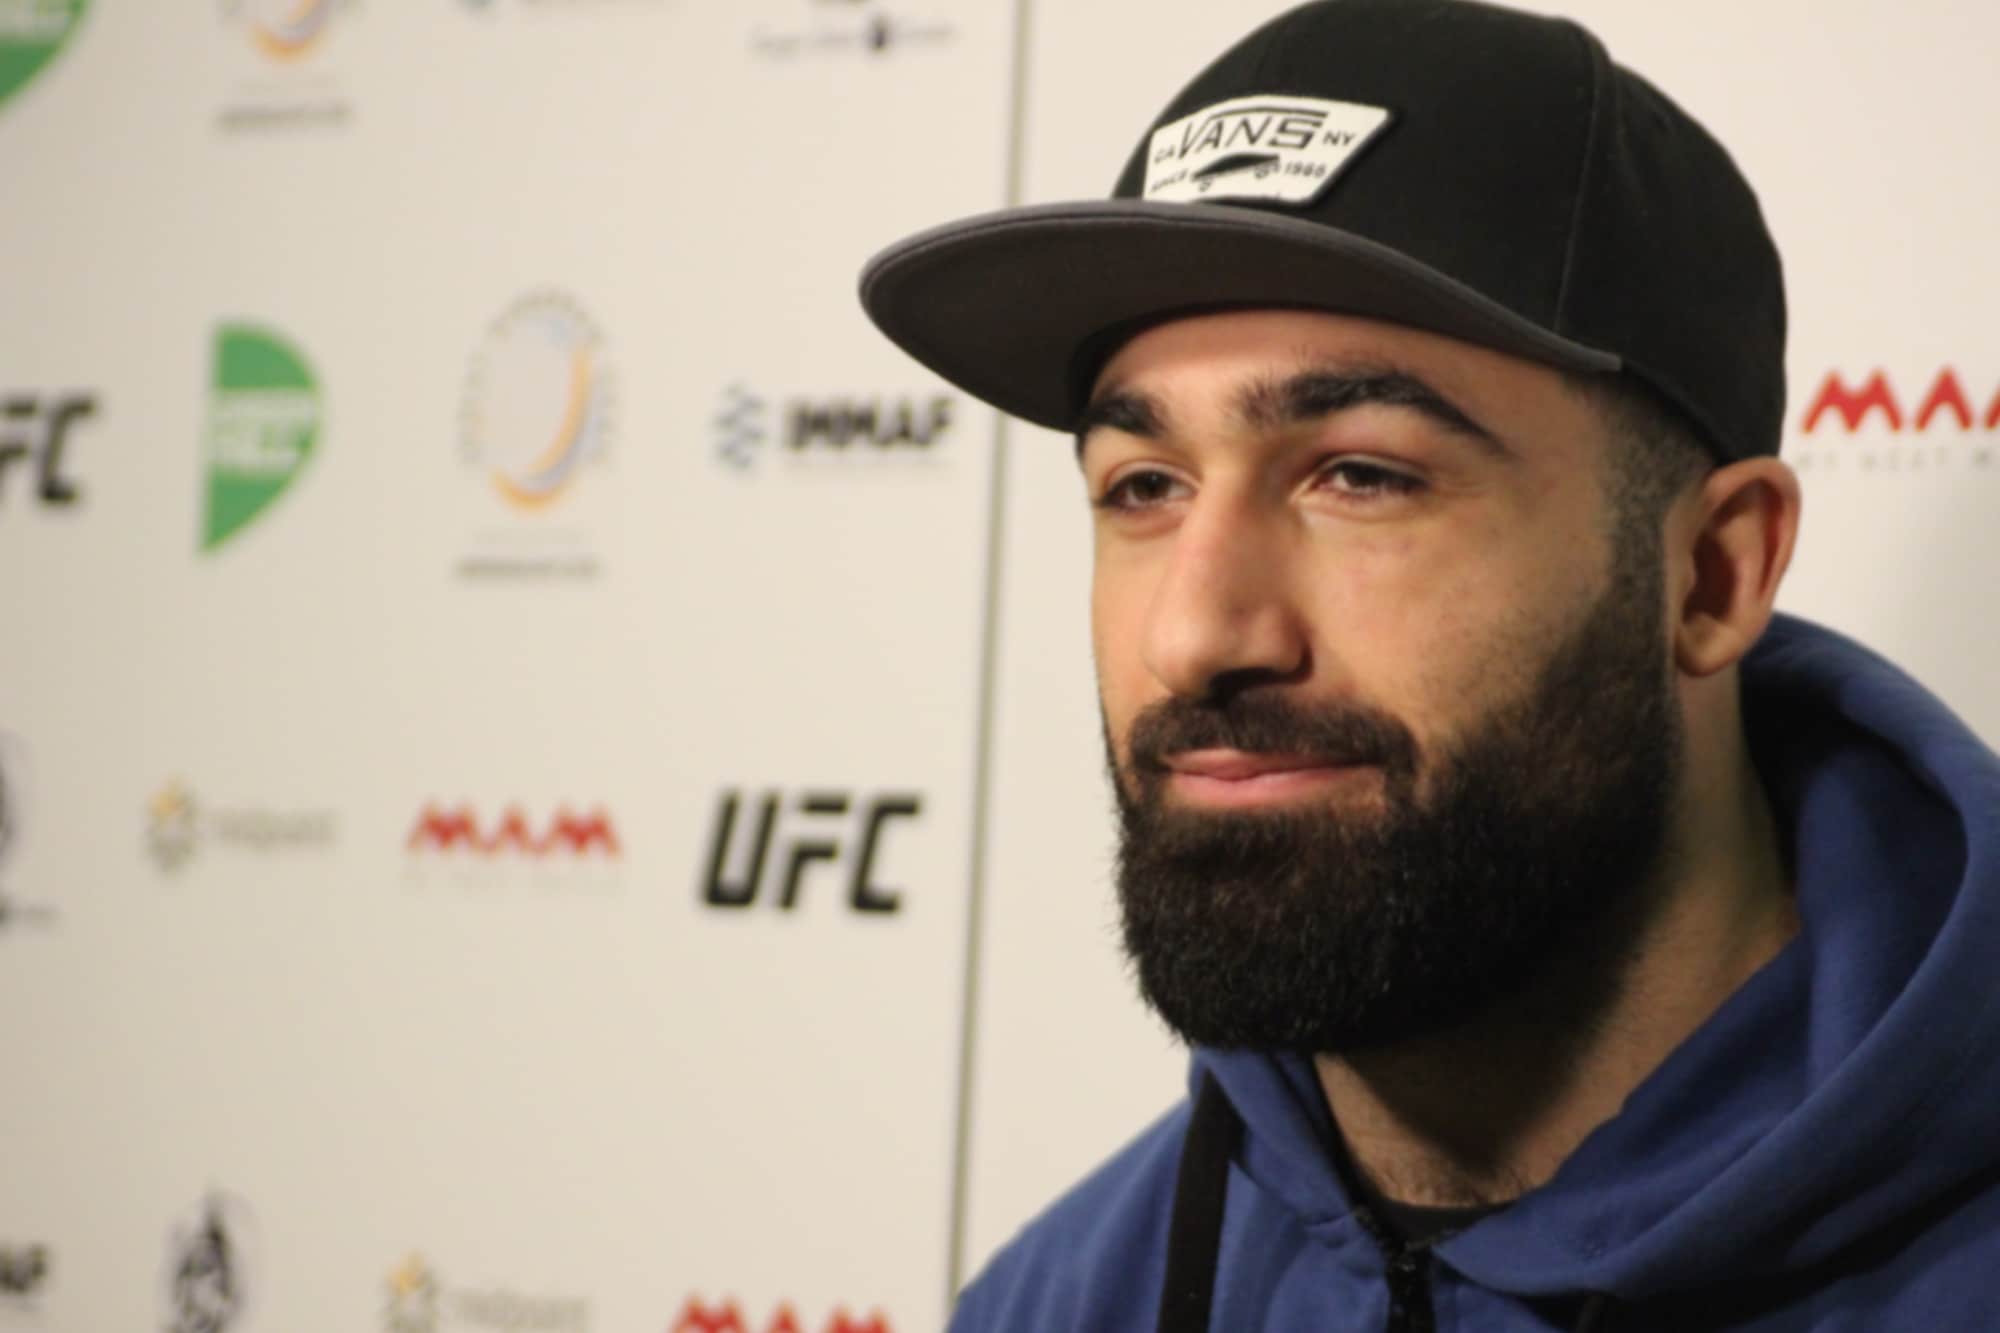 IMMAF standout Rostem Akman joins Cage Warriors title tournament on road back to UFC